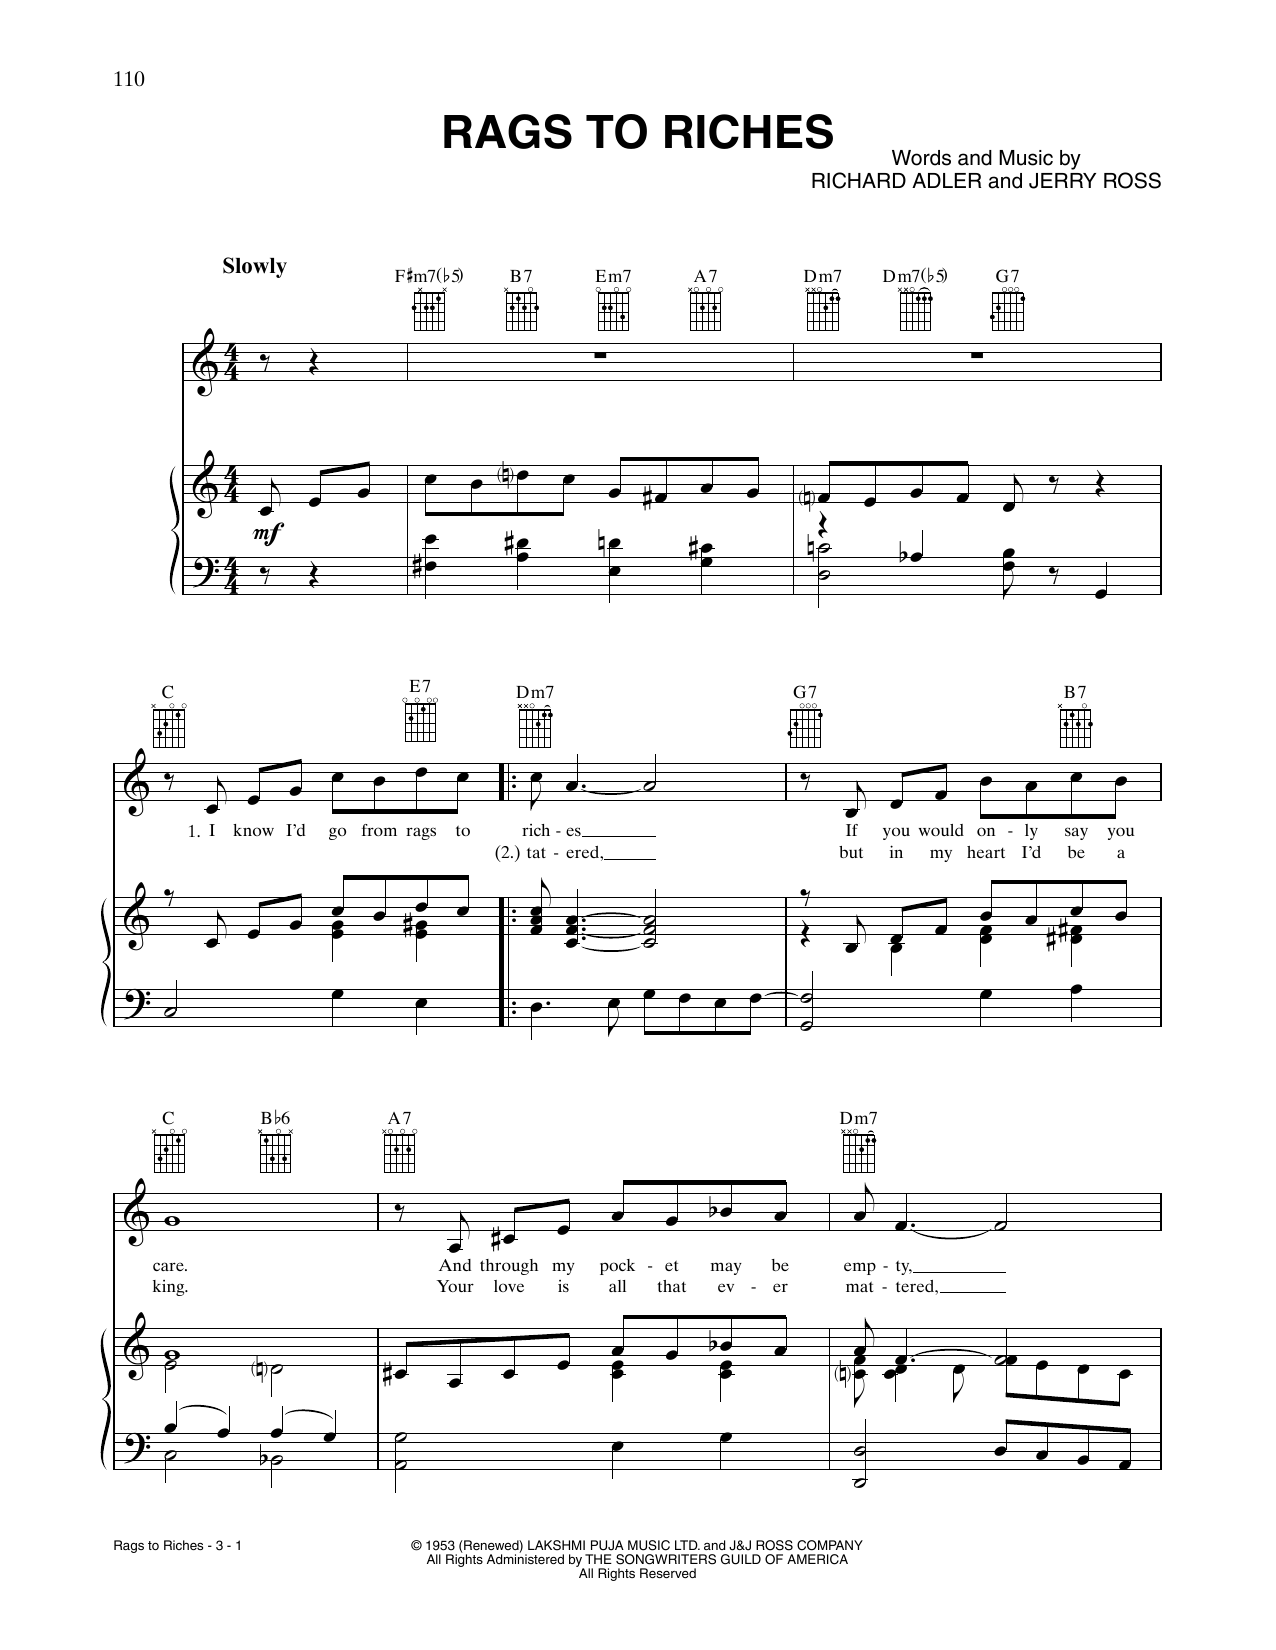 Download Tony Bennett Rags To Riches Sheet Music